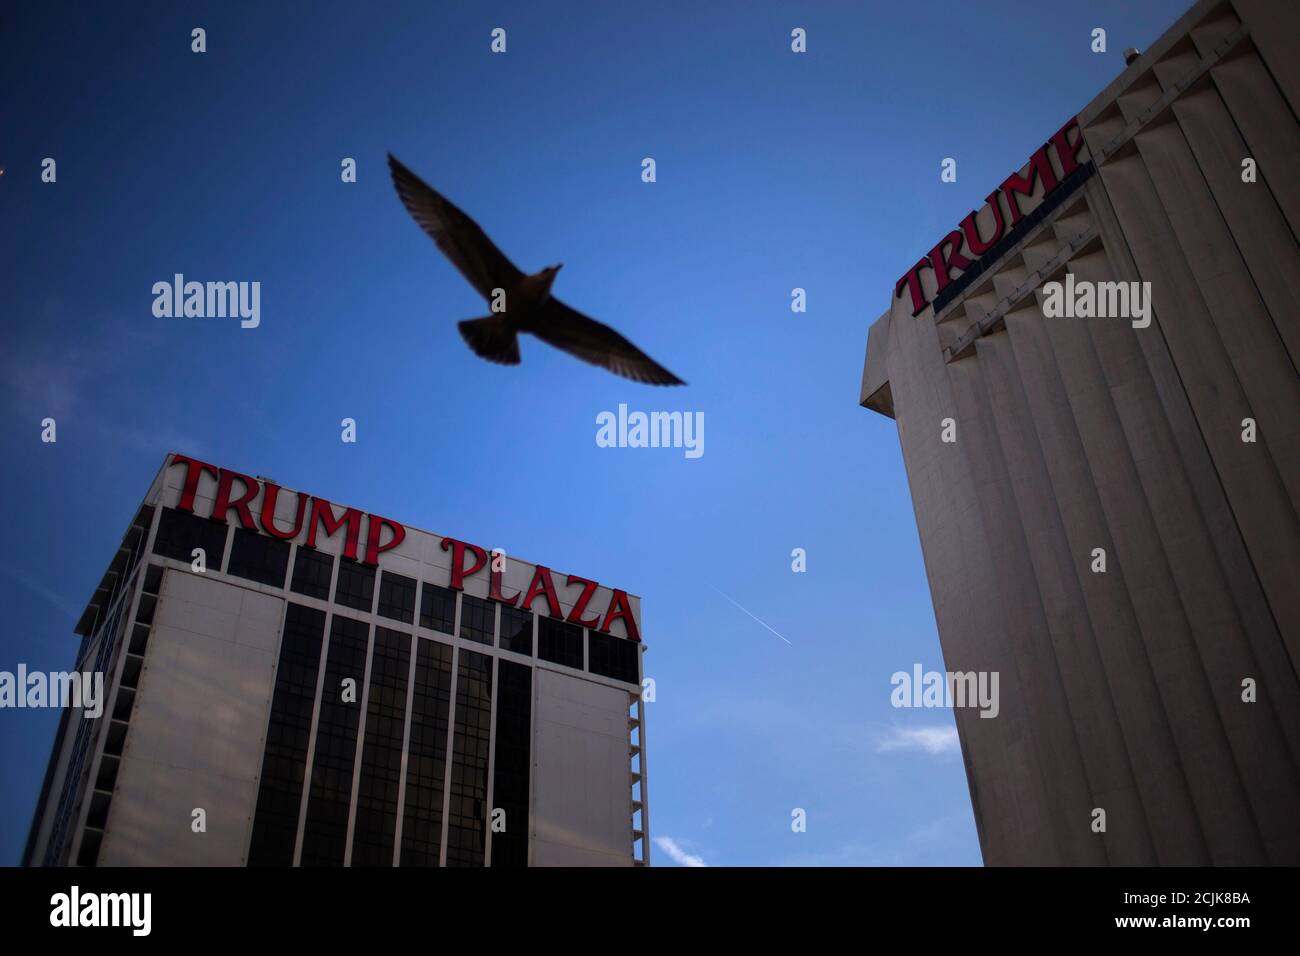 A seagull flies past the Trump Plaza Hotel and Casino, one of two casinos owned by Trump Entertainment Resorts, in Atlantic City, New Jersey on September 15, 2014.  The spread of casino gambling through the northeastern United States, where New York, Pennsylvania and Maine also feature casinos, has taken a heavy toll on New Jersey's Atlantic City, which has seen four casinos close his year, most recently the Trump Plaza, which closed its doors early Tuesday morning. Picture taken September 15, 2014.  REUTERS/Adrees Latif   (UNITED STATES - Tags: BUSINESS SOCIETY) Stock Photo